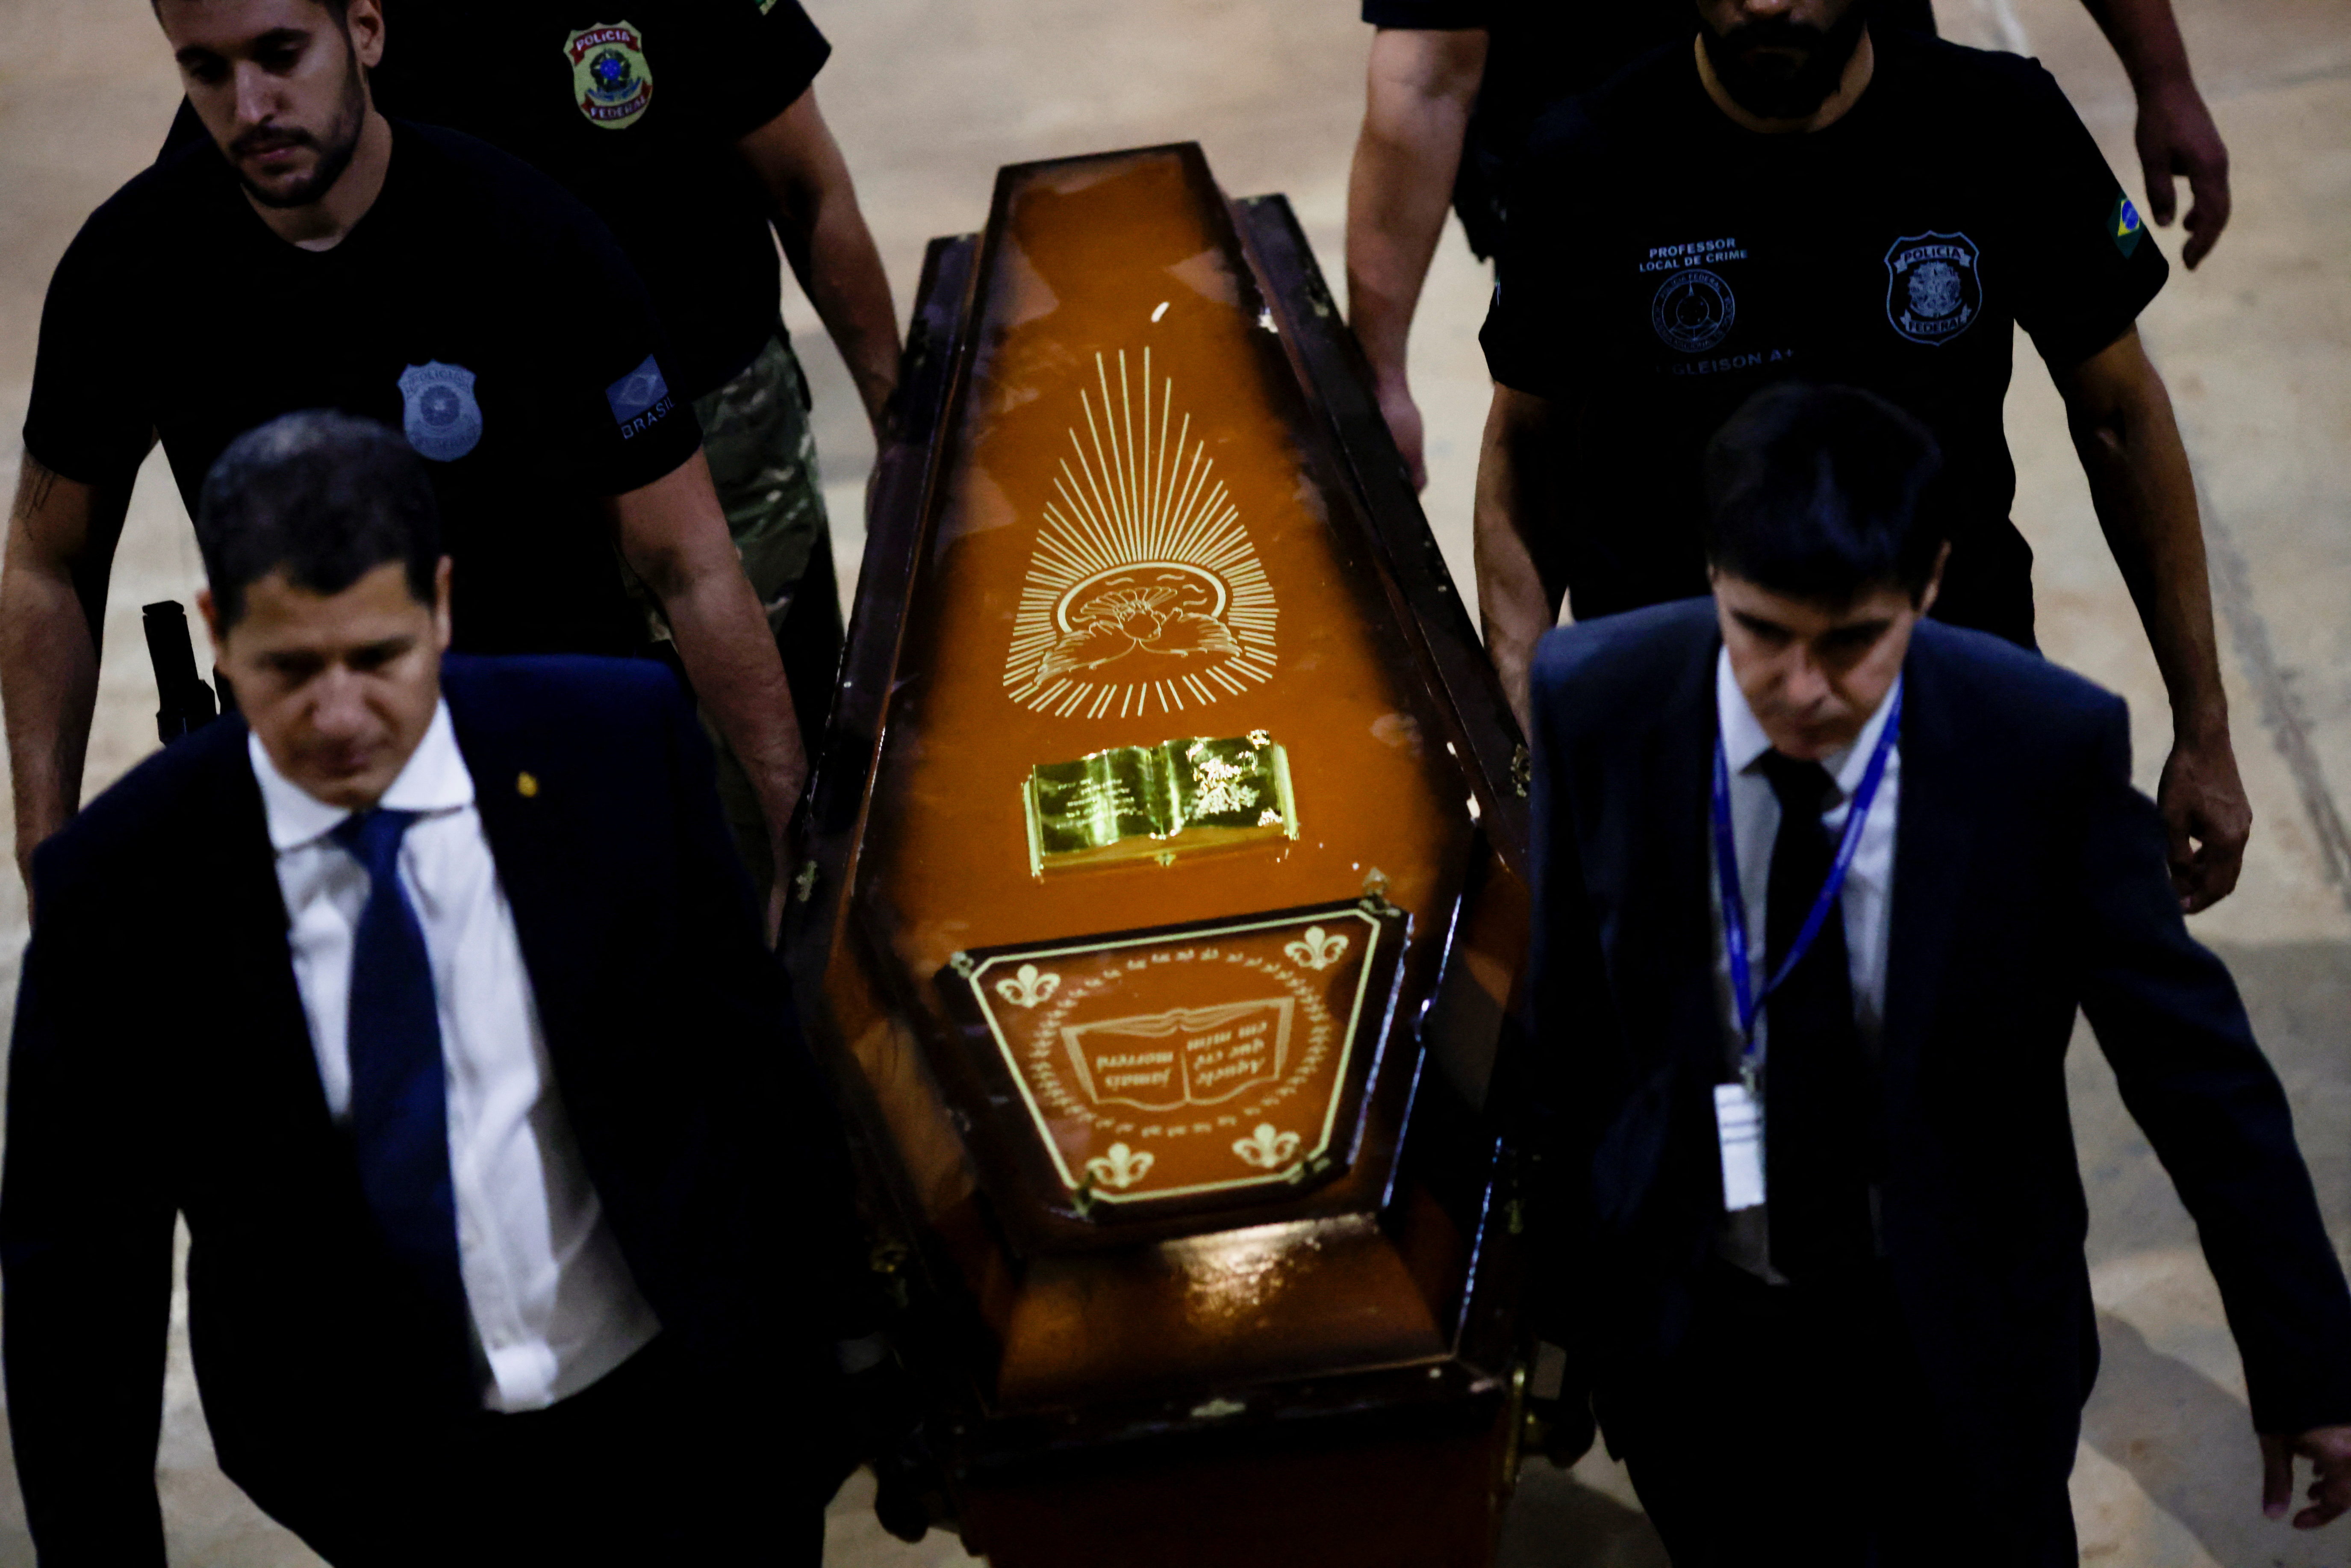 Federal Police officers carry a coffin containing human remains after a suspect confessed to killing British journalist Dom Phillips and Brazilian indigenous expert Bruno Pereira, in Brasilia